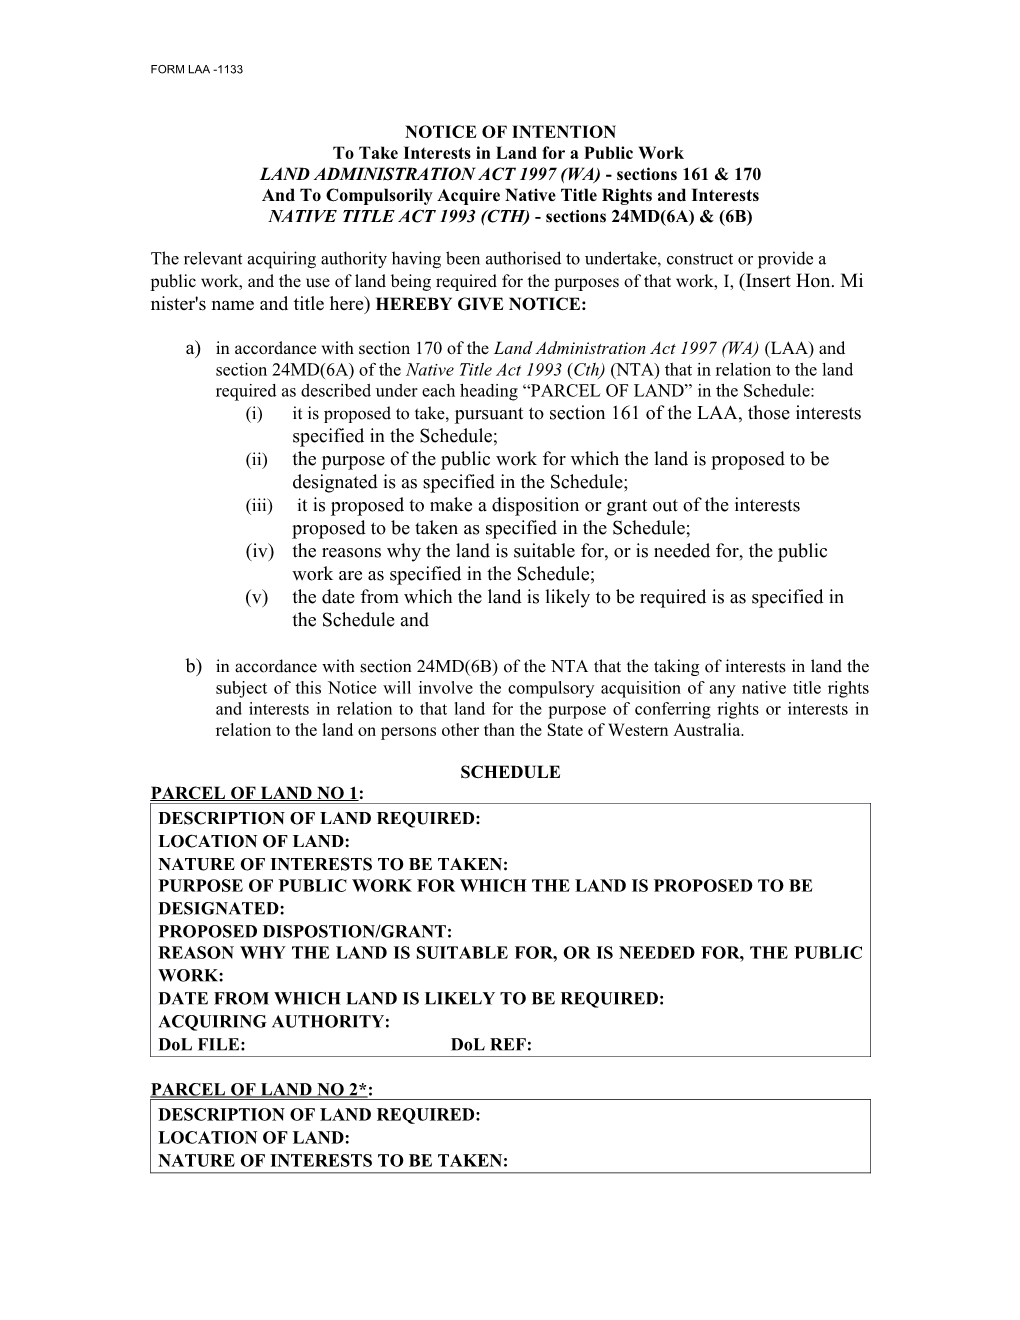 LAA Form 1133 Notice of Intention to Take Interests in Land for a Public Work and To